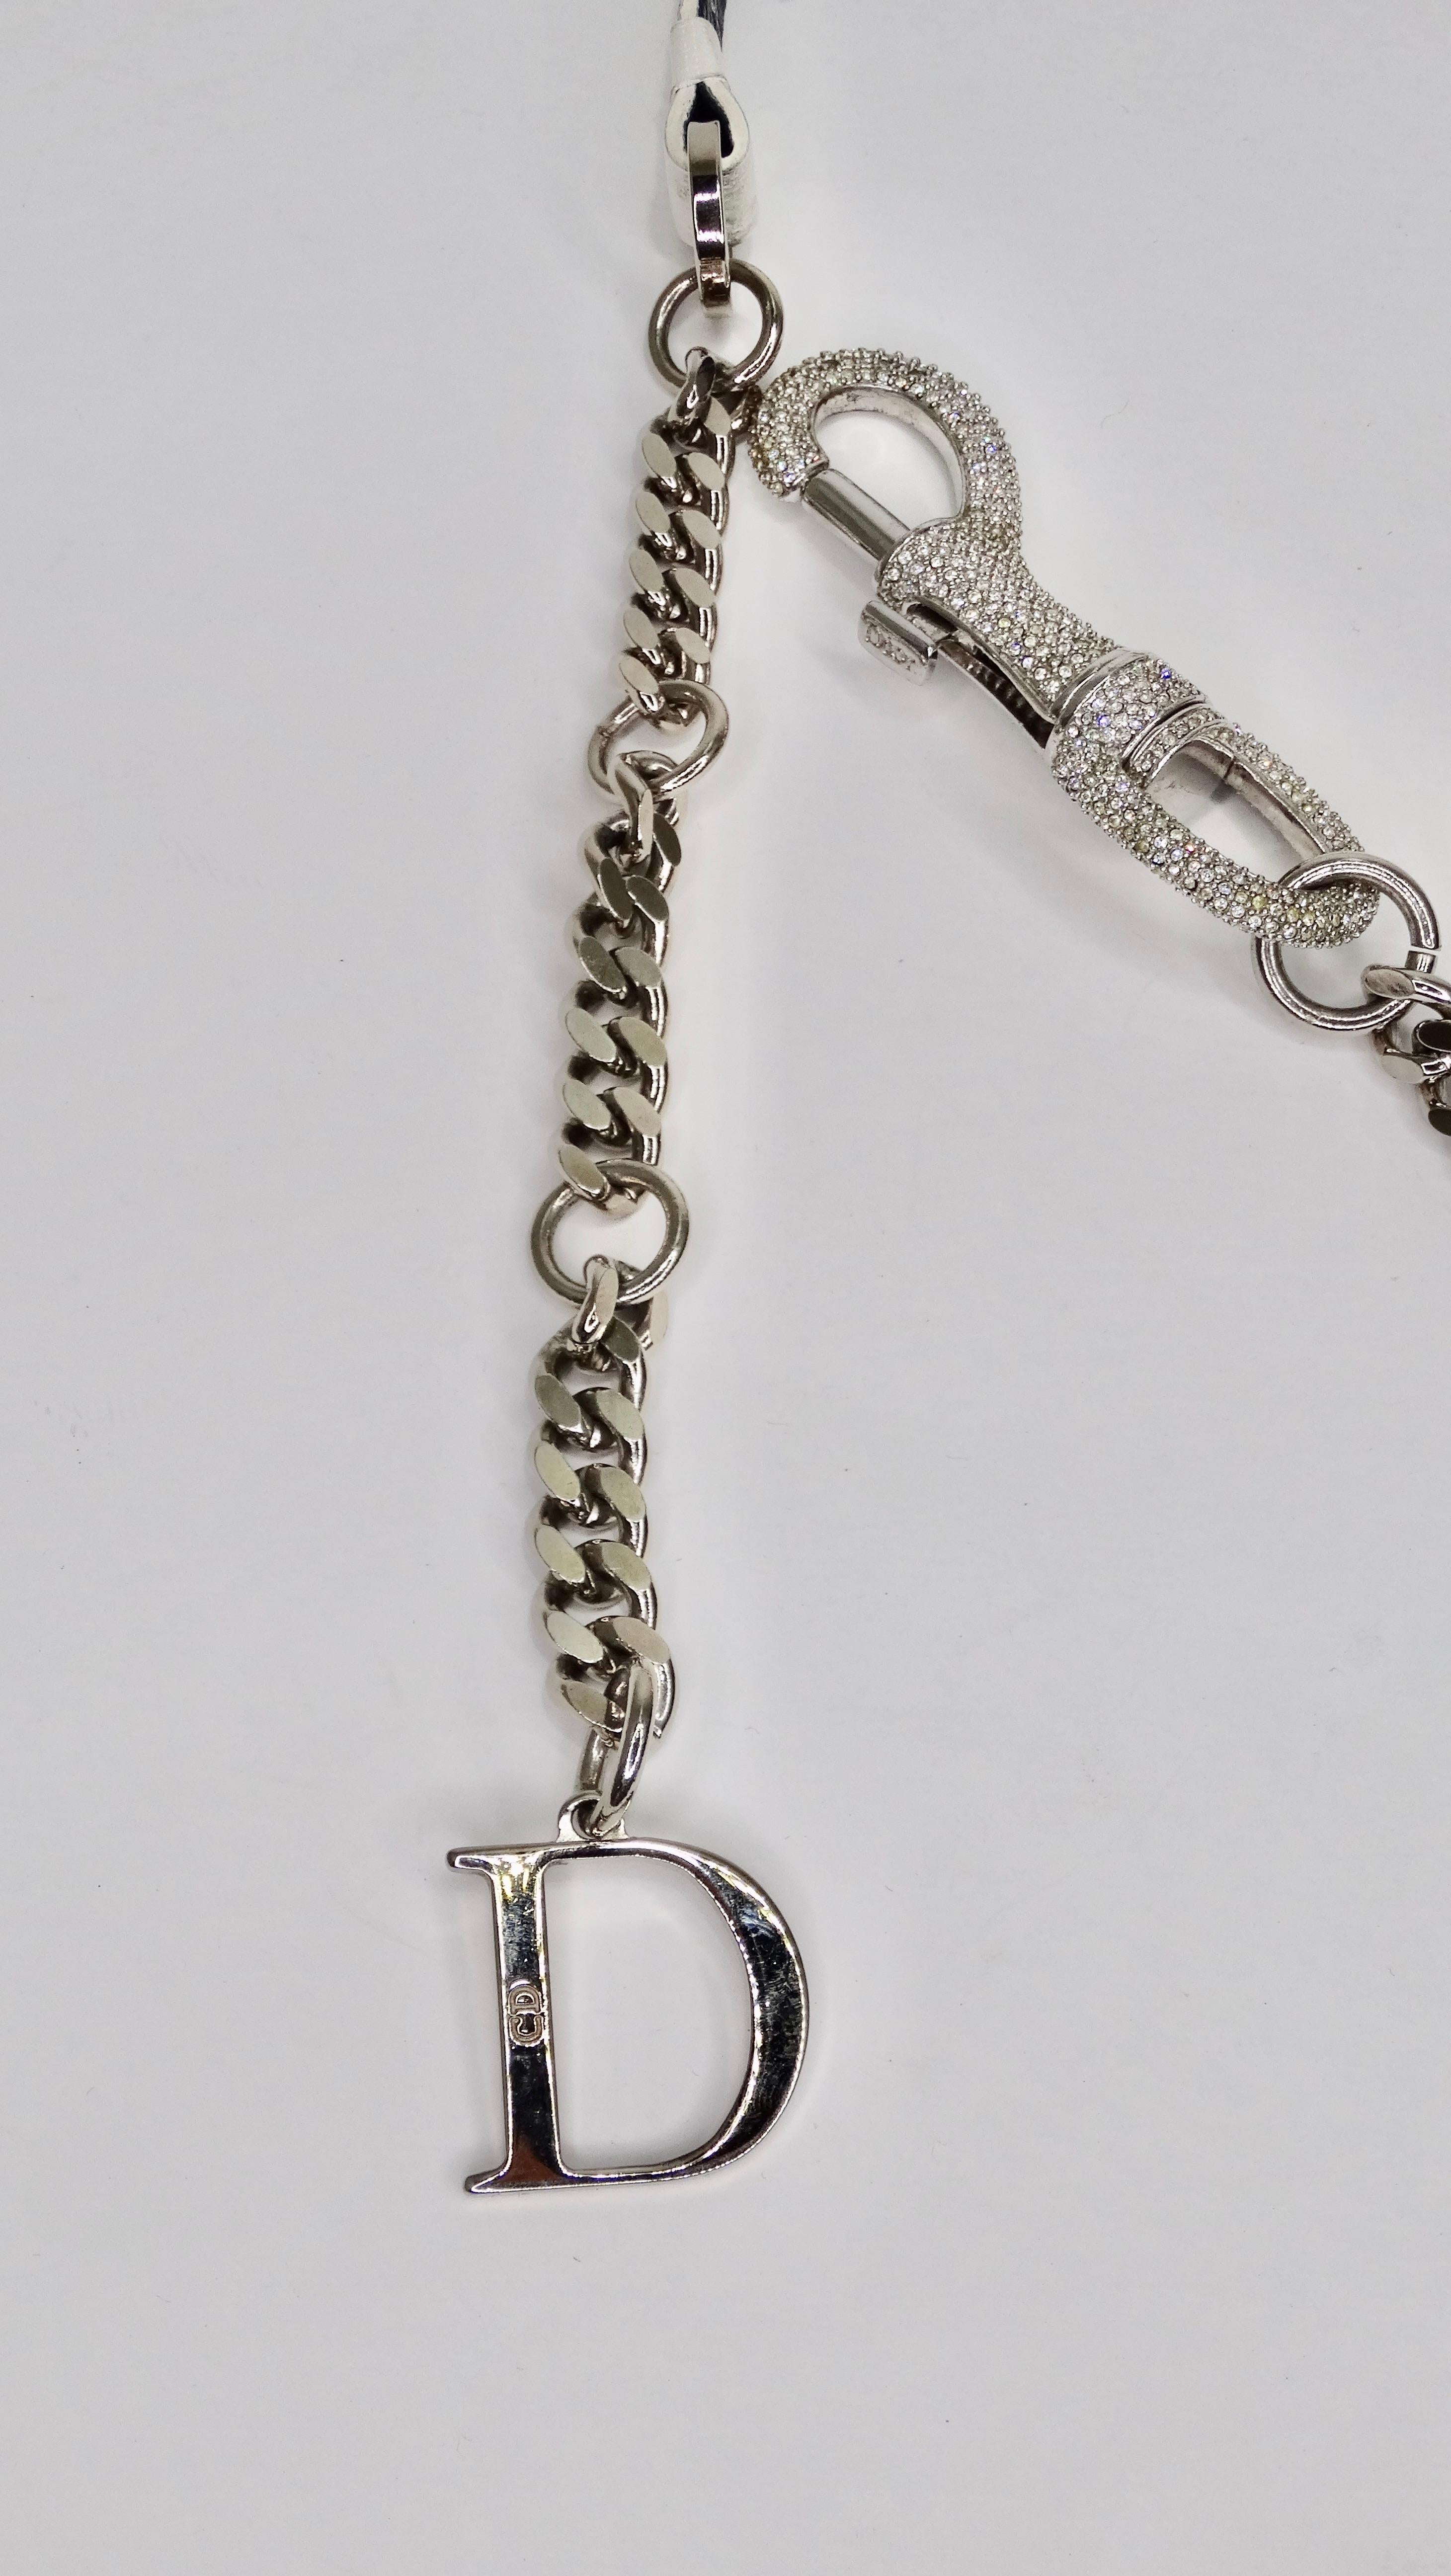 How adorable is this Dior belt?! Stunning Galliano for Christian Dior belt circa 2003 features white leather with a silver chain and Dior plaque. Adjustable rhinestone carabiner closure with a single 'D' charm. Made in Italy. A true vintage show